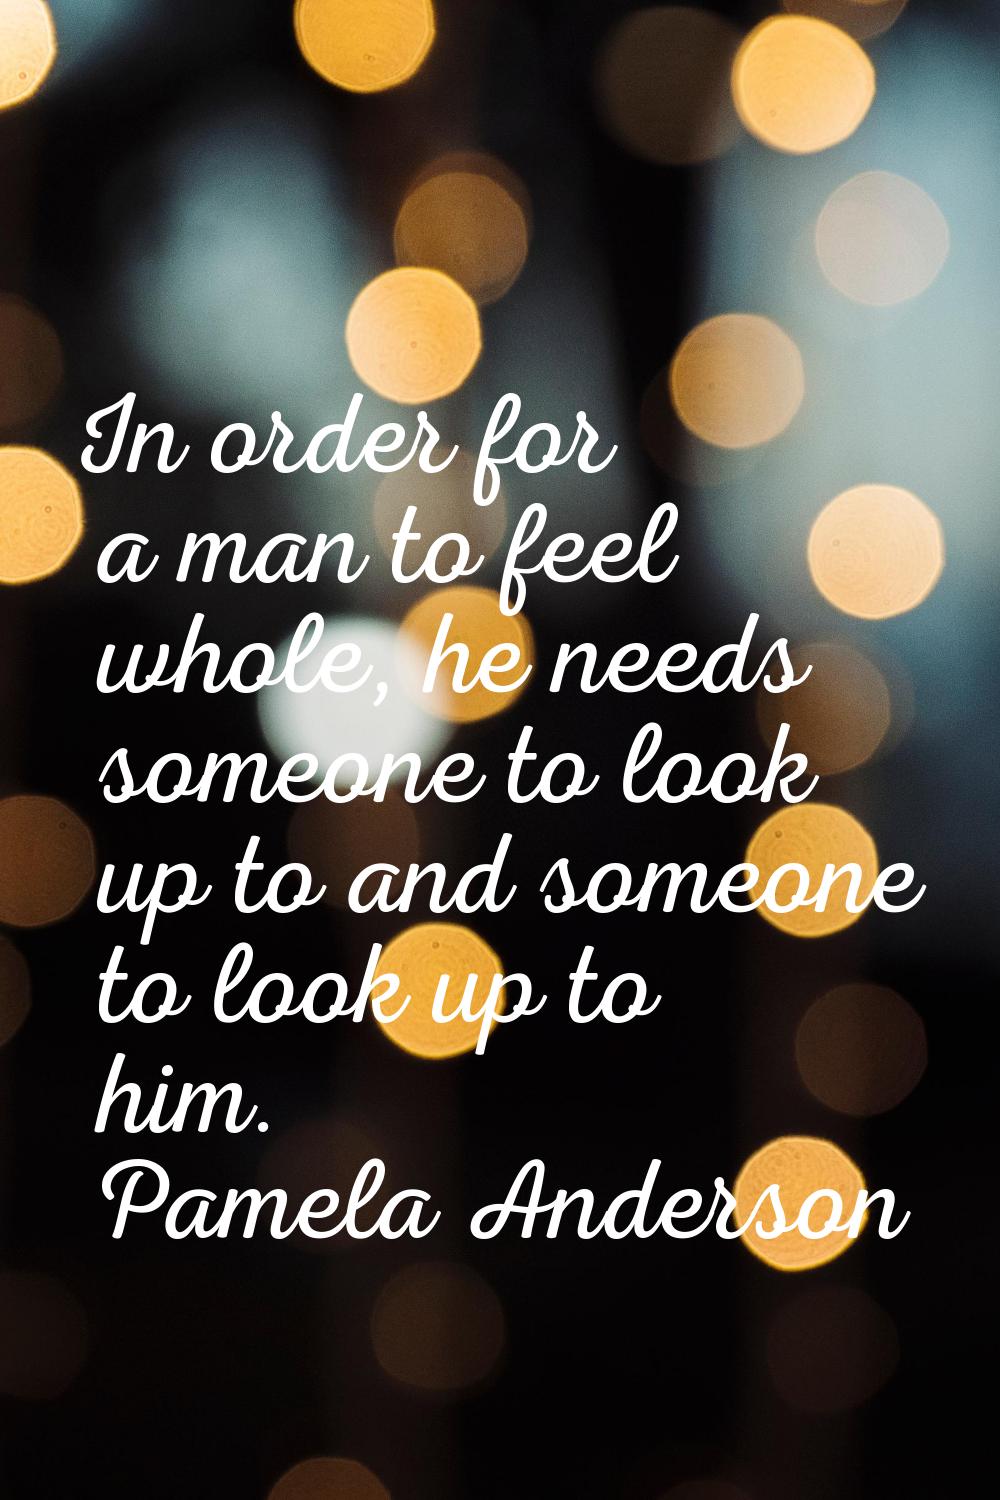 In order for a man to feel whole, he needs someone to look up to and someone to look up to him.